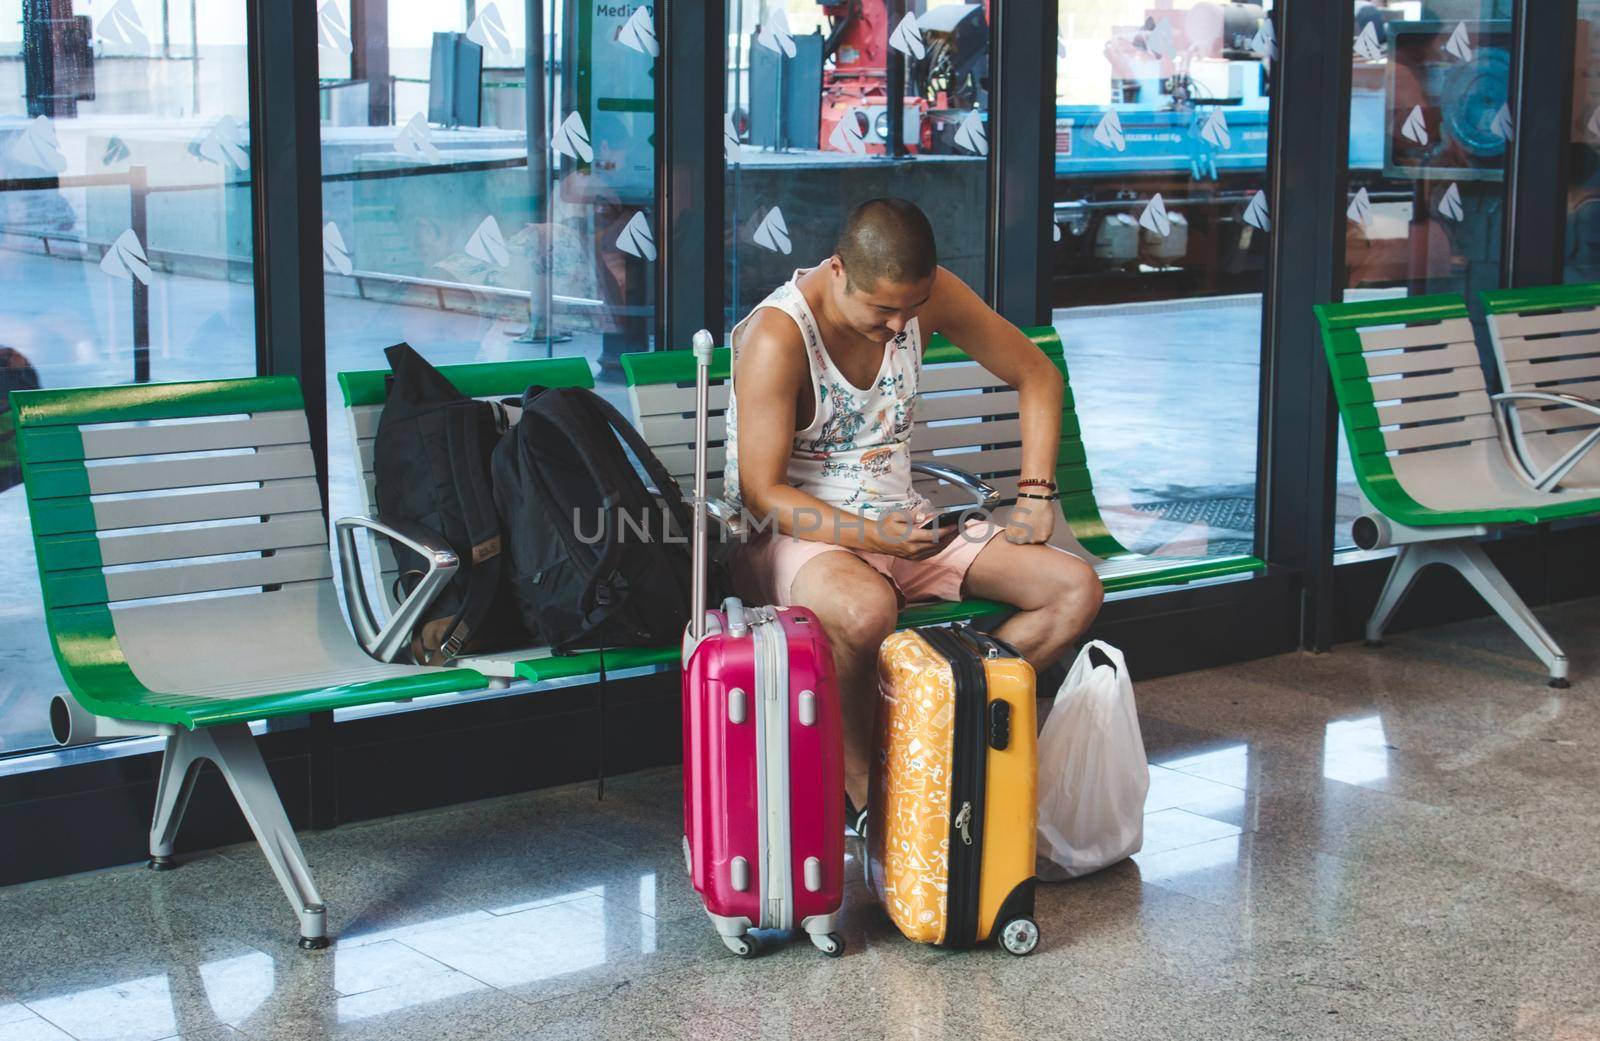 Granada / Spain - August 22 2019: A young man checking his phone at a train station with his luggage